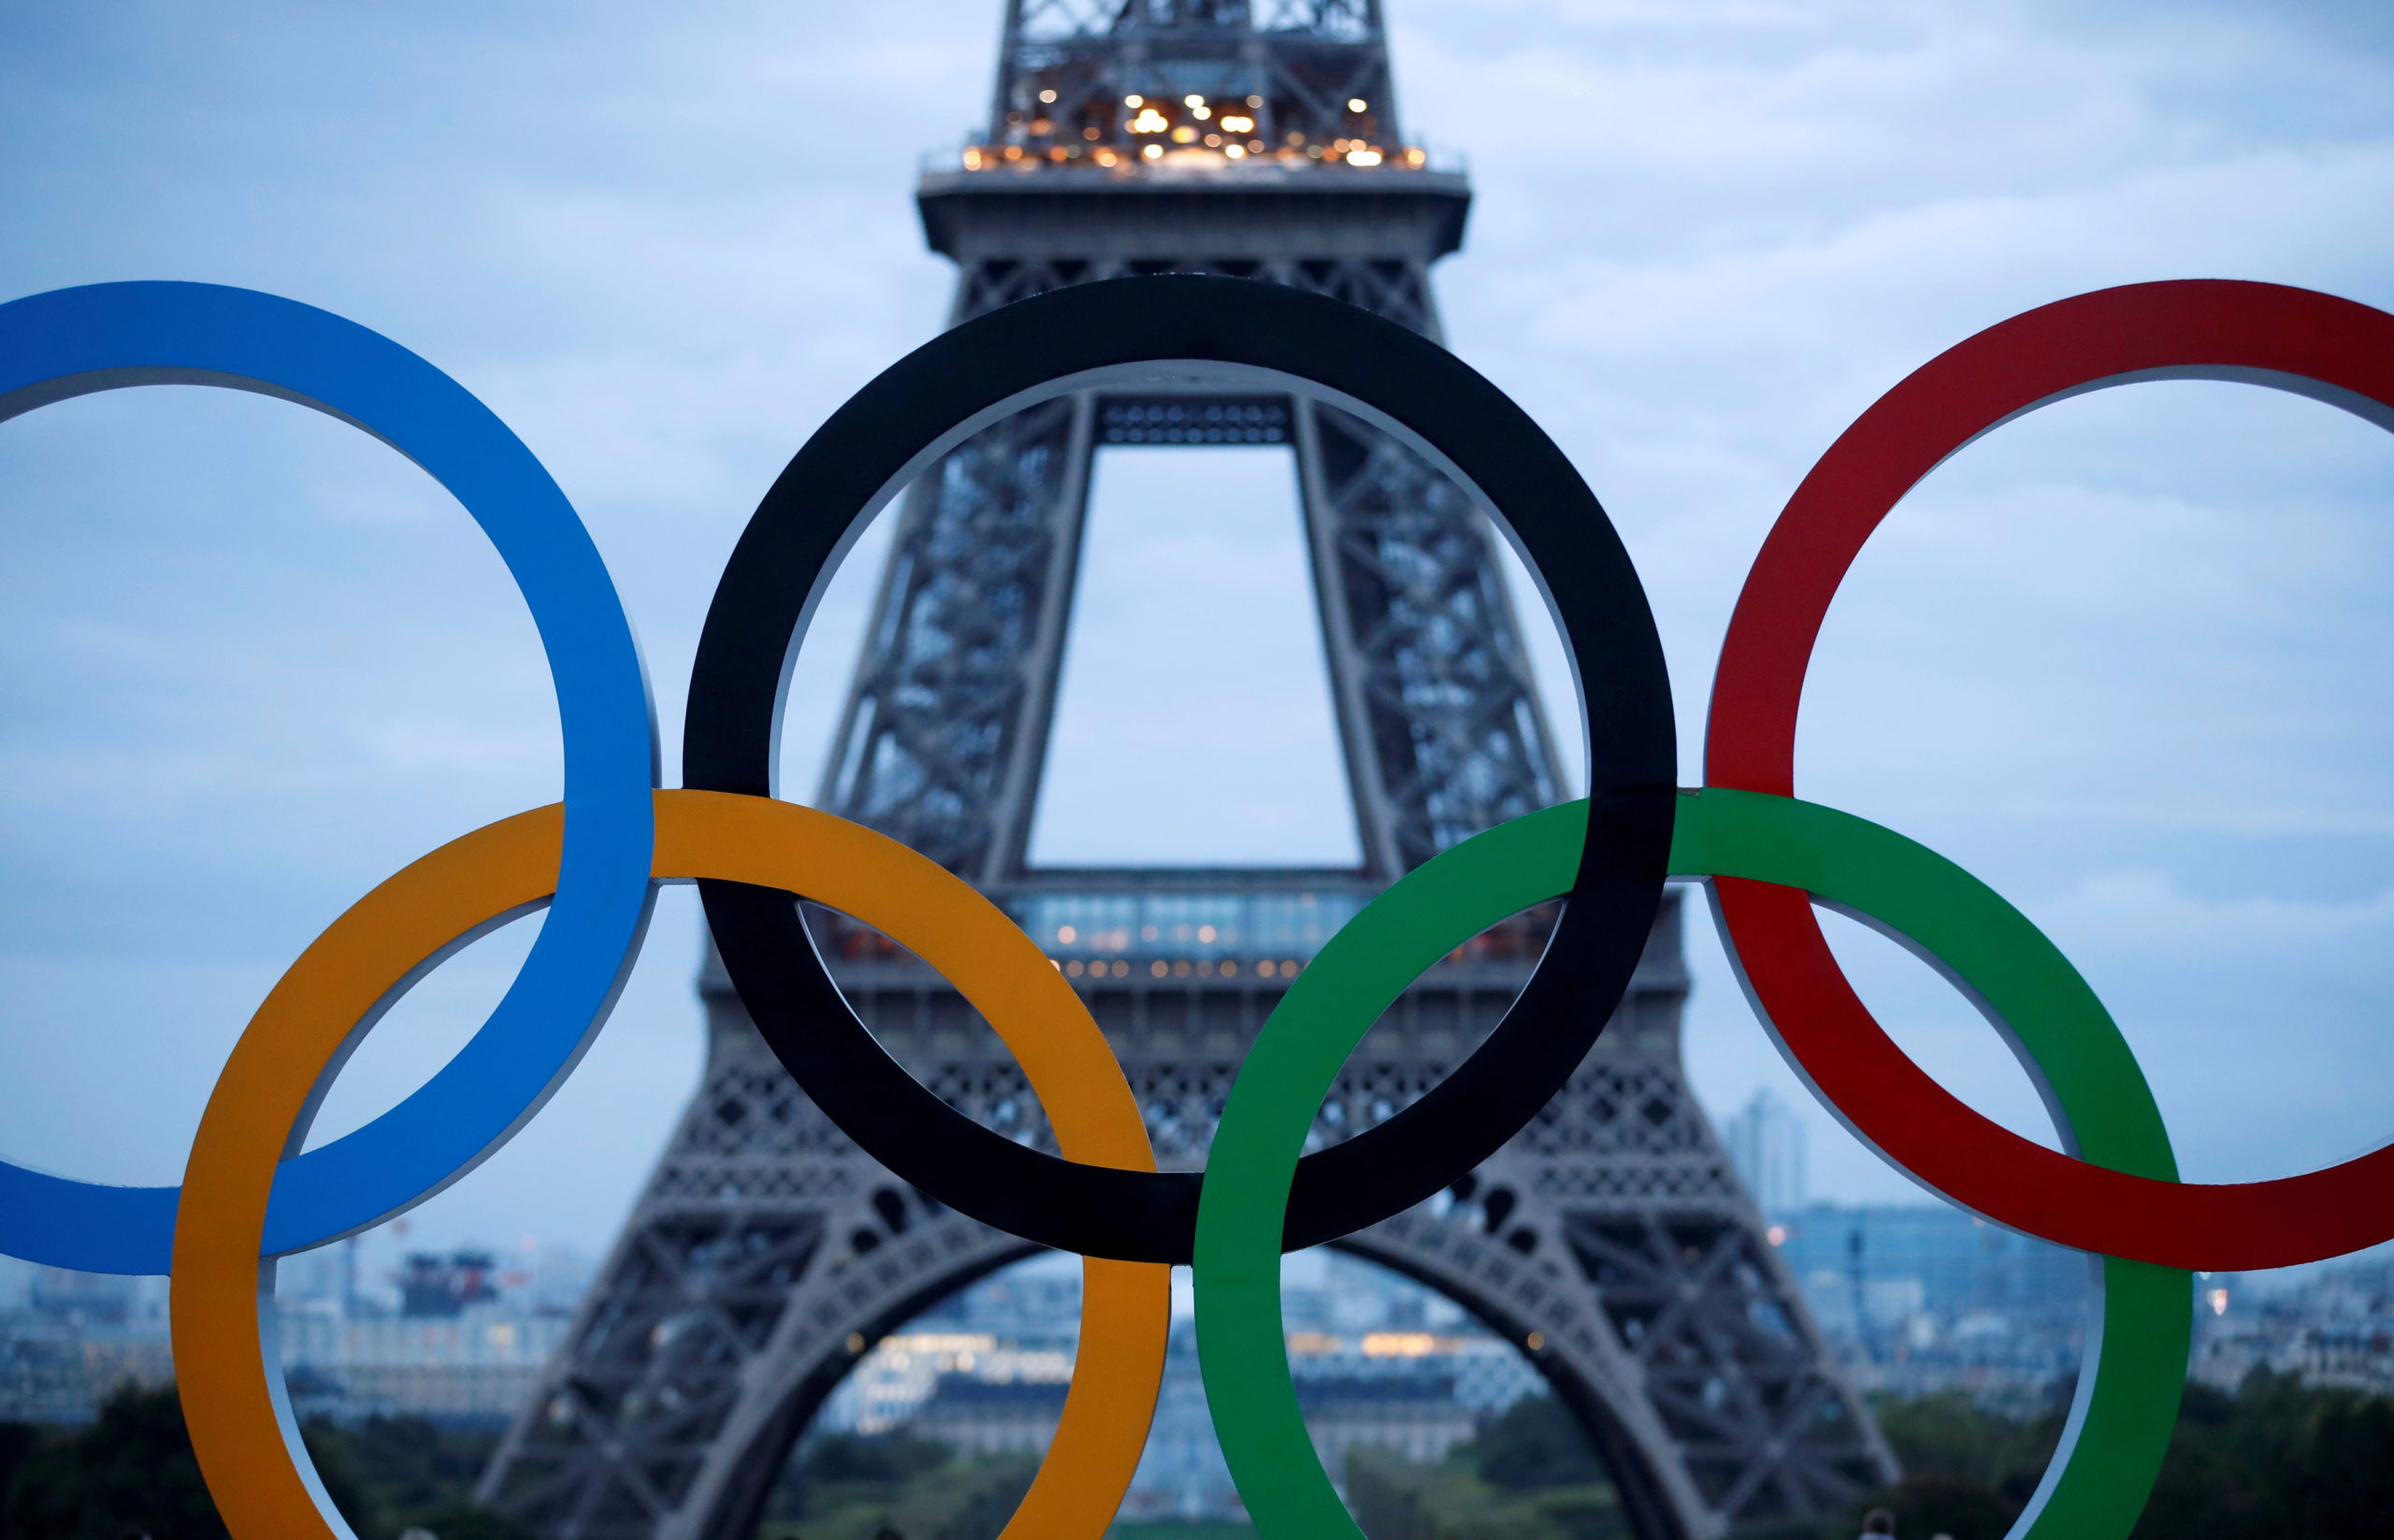 Olympic rings to celebrate the IOC official announcement that Paris won the 2024 Olympic bid are seen in front of the Eiffel Tower at the Trocadero square in Paris, France, September 14, 2017.   